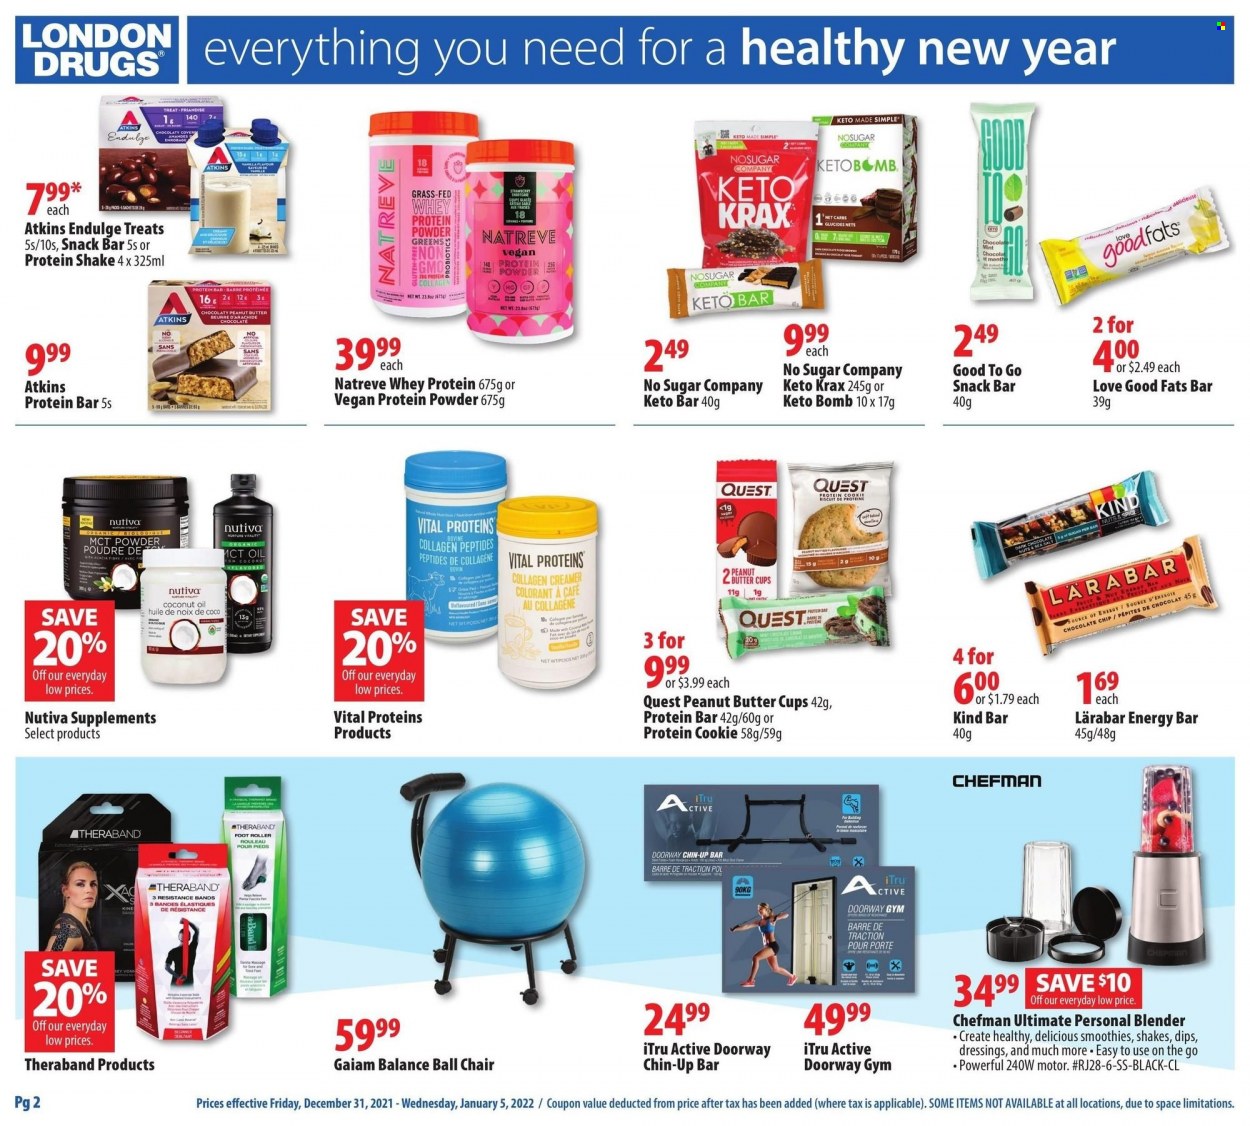 thumbnail - London Drugs Flyer - December 31, 2021 - January 05, 2022 - Sales products - chocolate chips, biscuit, protein cookie, peanut butter cups, snack bar, protein bar, spice, coconut oil, oil, Chefman, roller, chair, ball chair, whey protein, Vital Proteins, blender. Page 2.